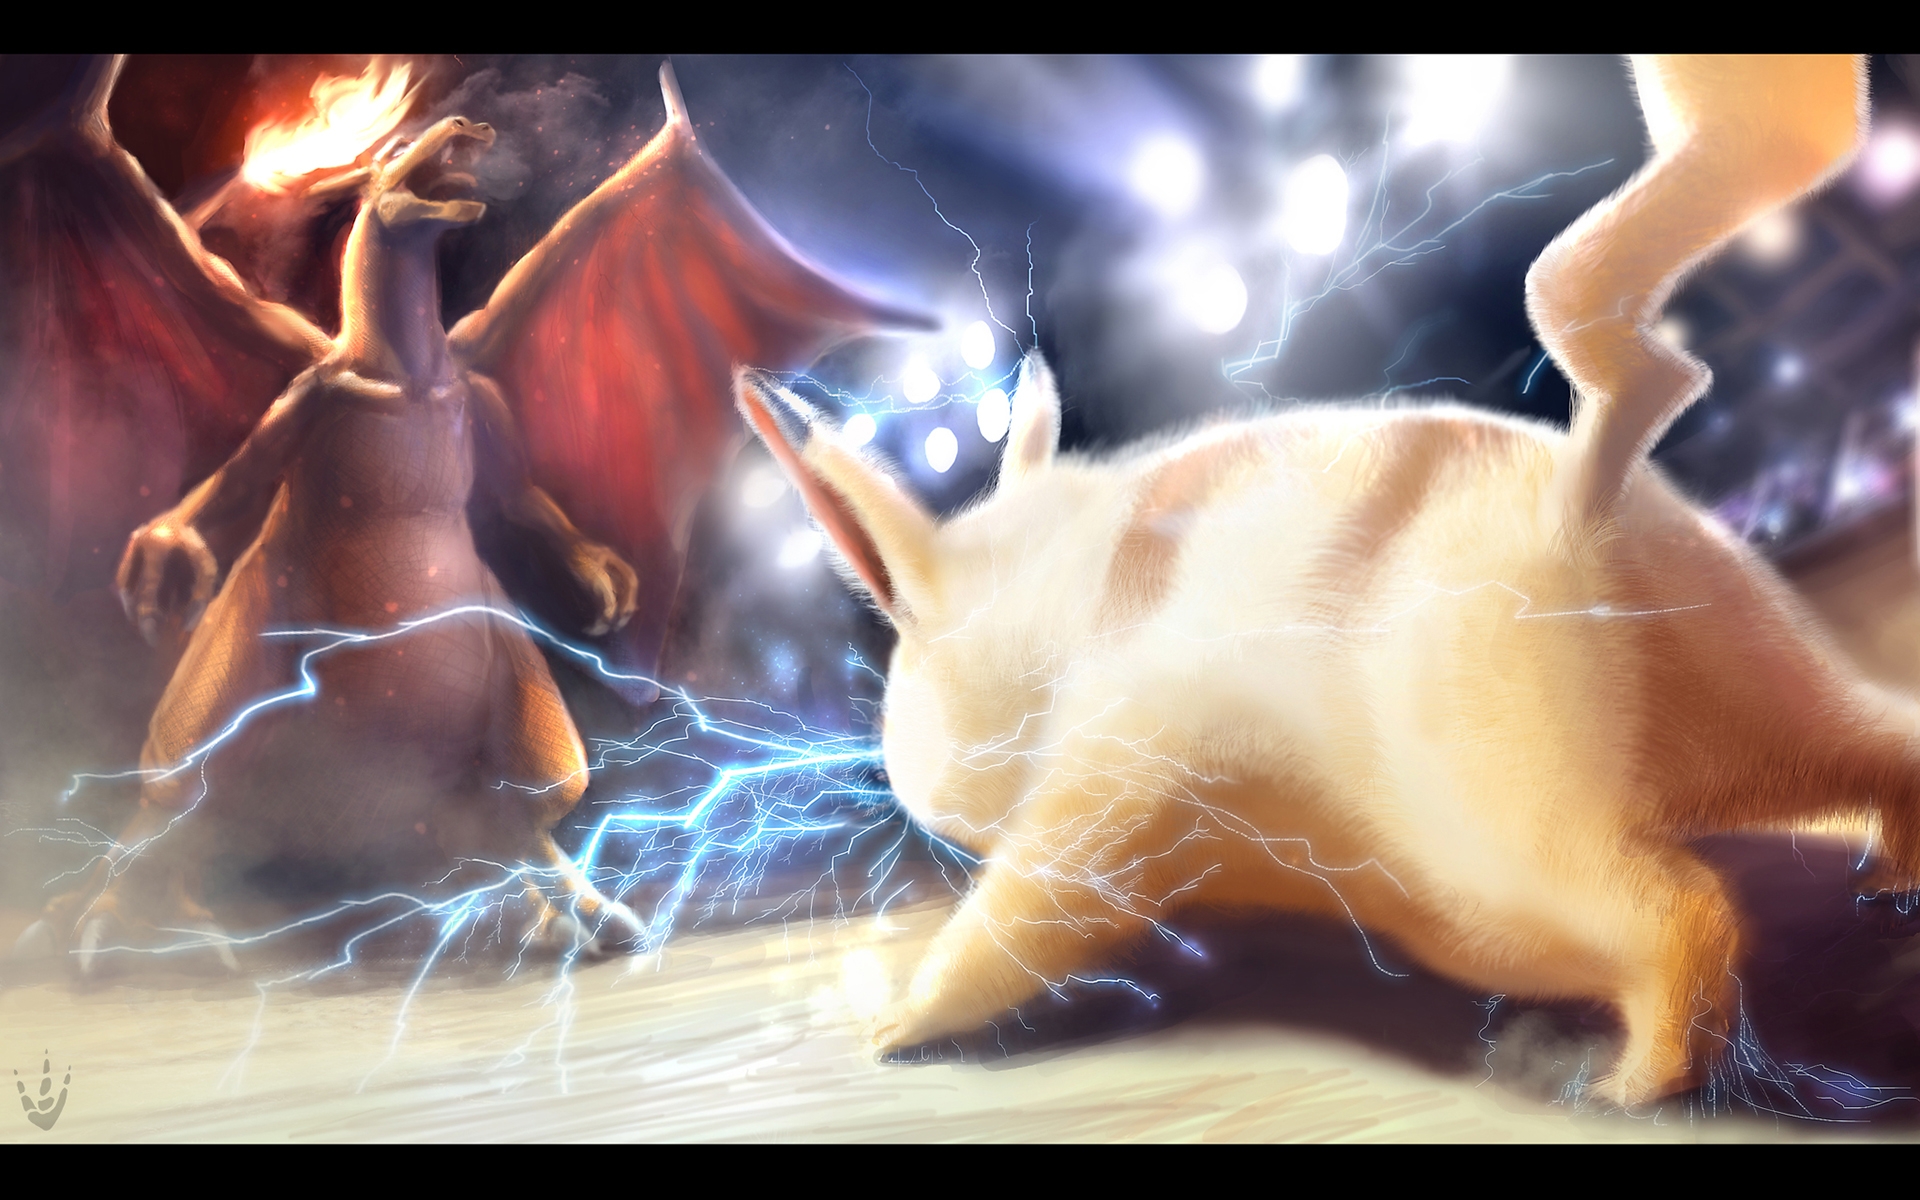 Pikachu Vs Charizard In A Digital Painting Style